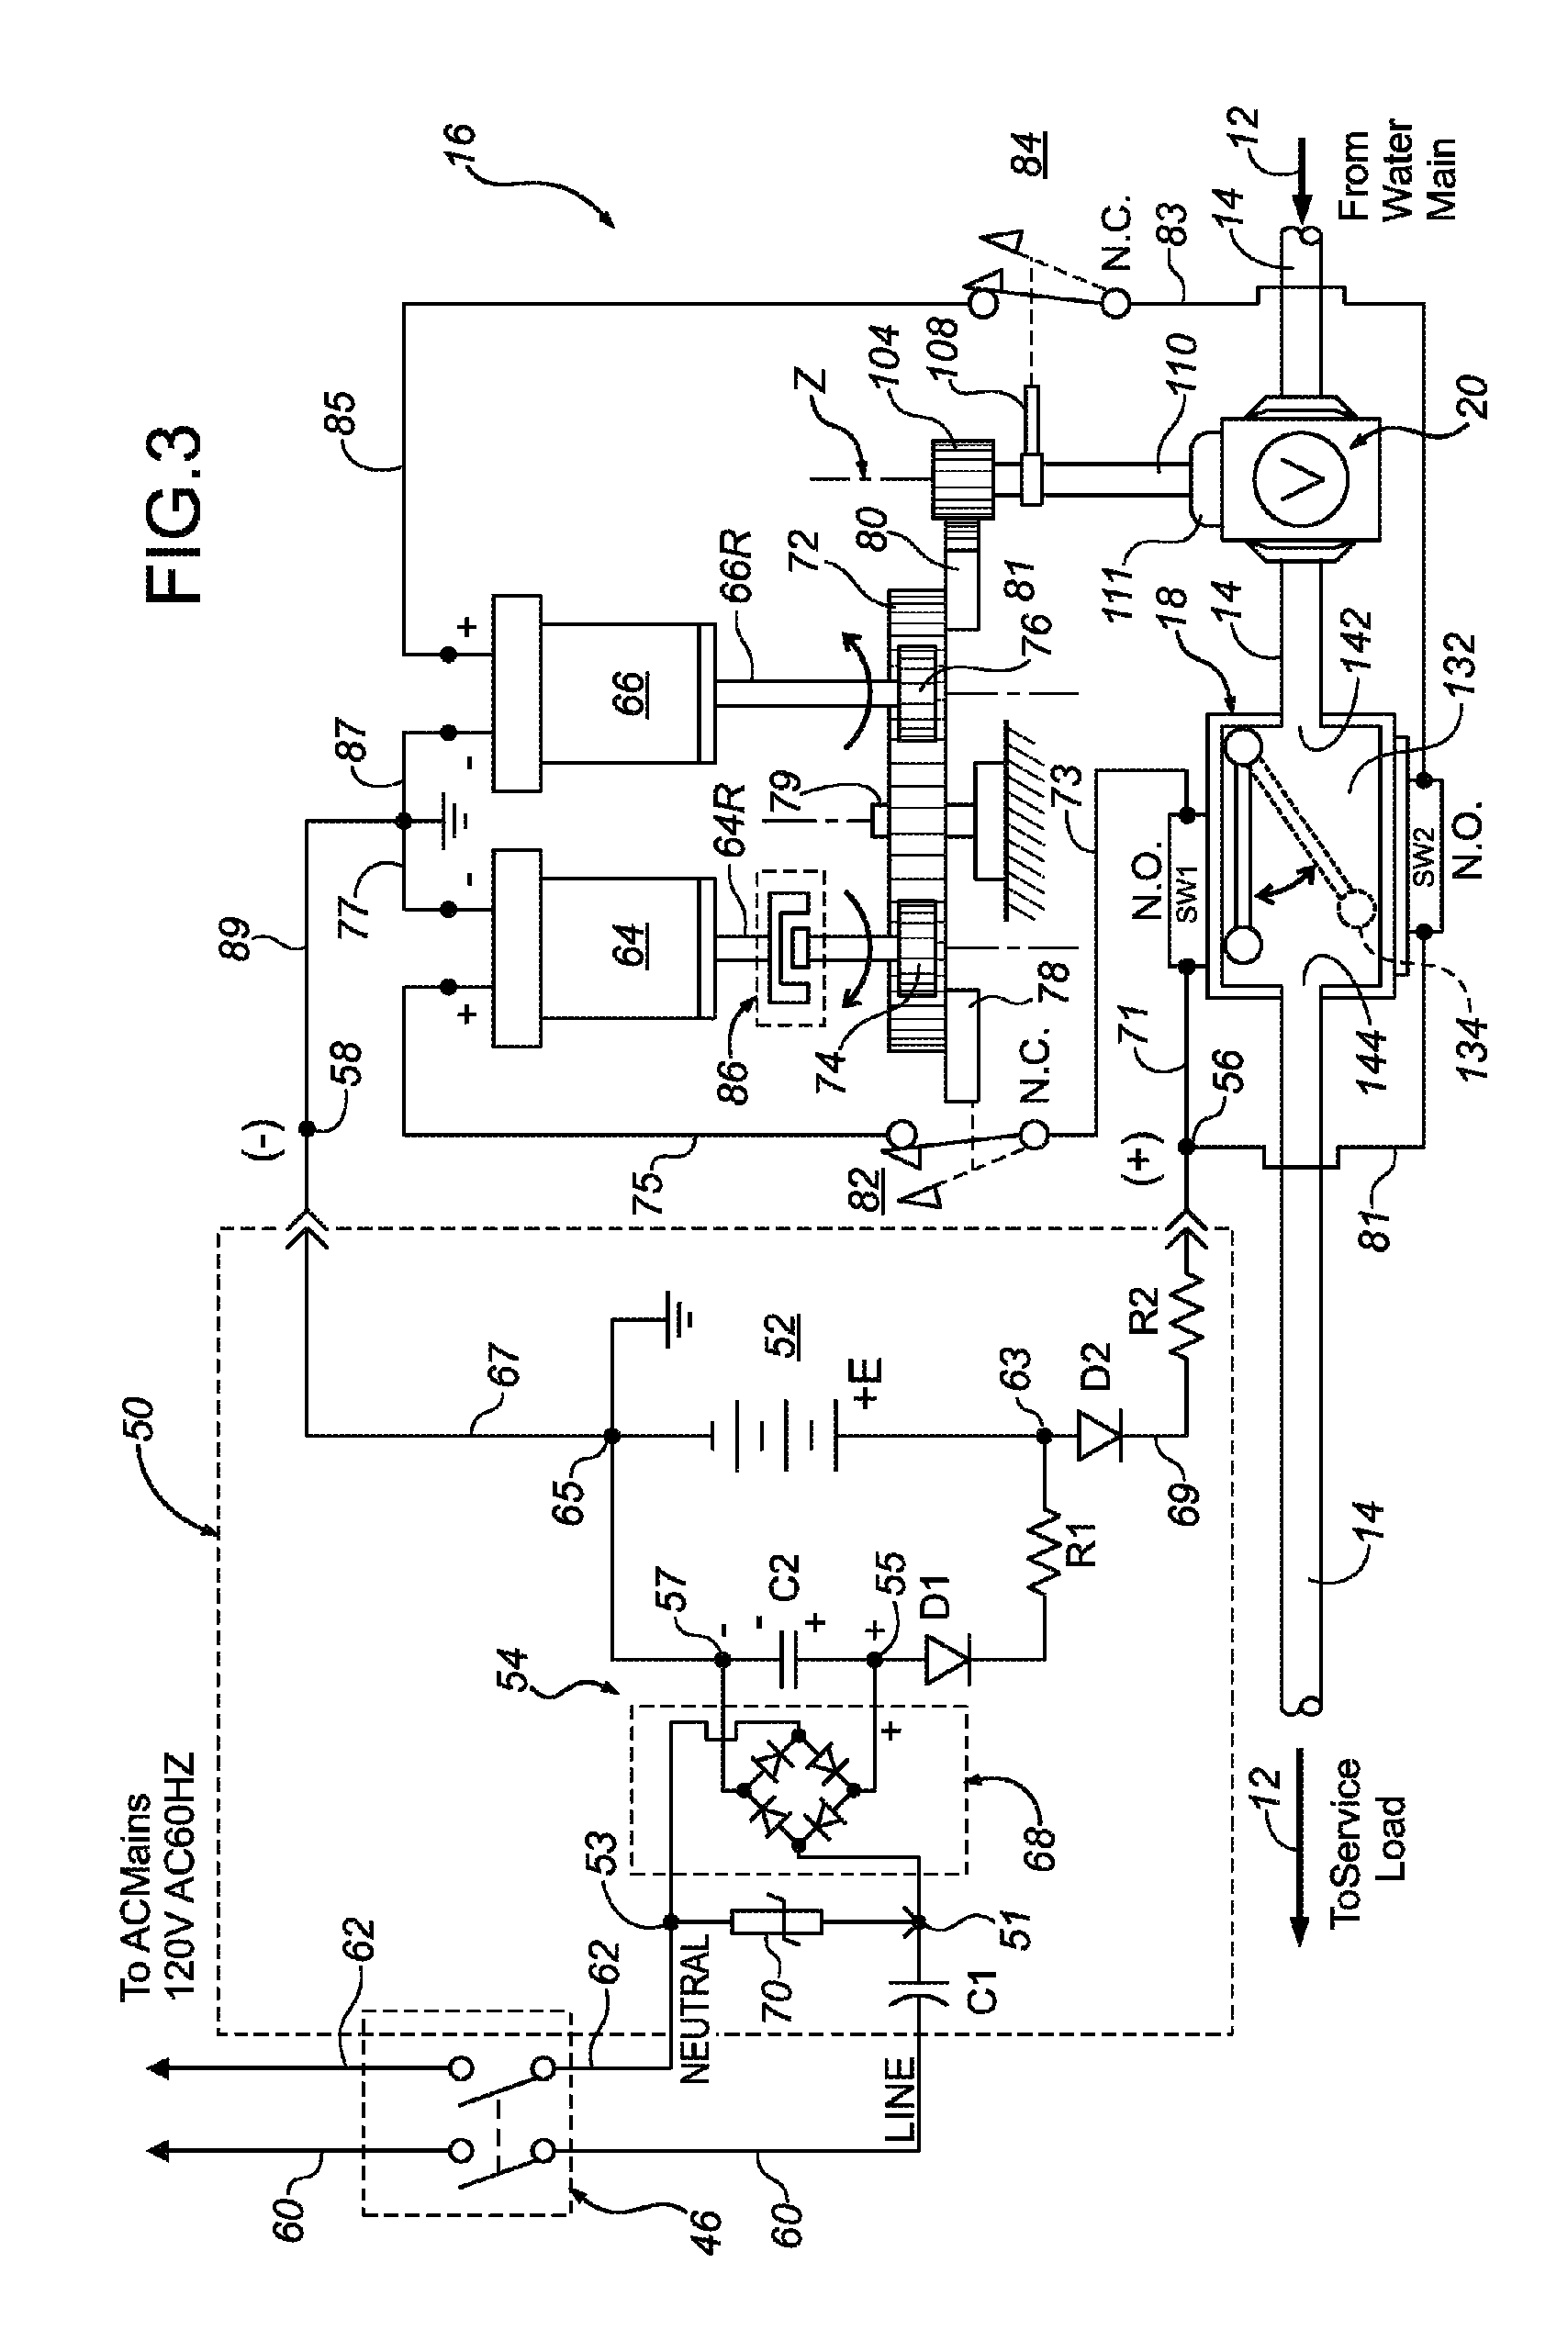 Water supply control assembly with automatic shut-off and duty cycle reset